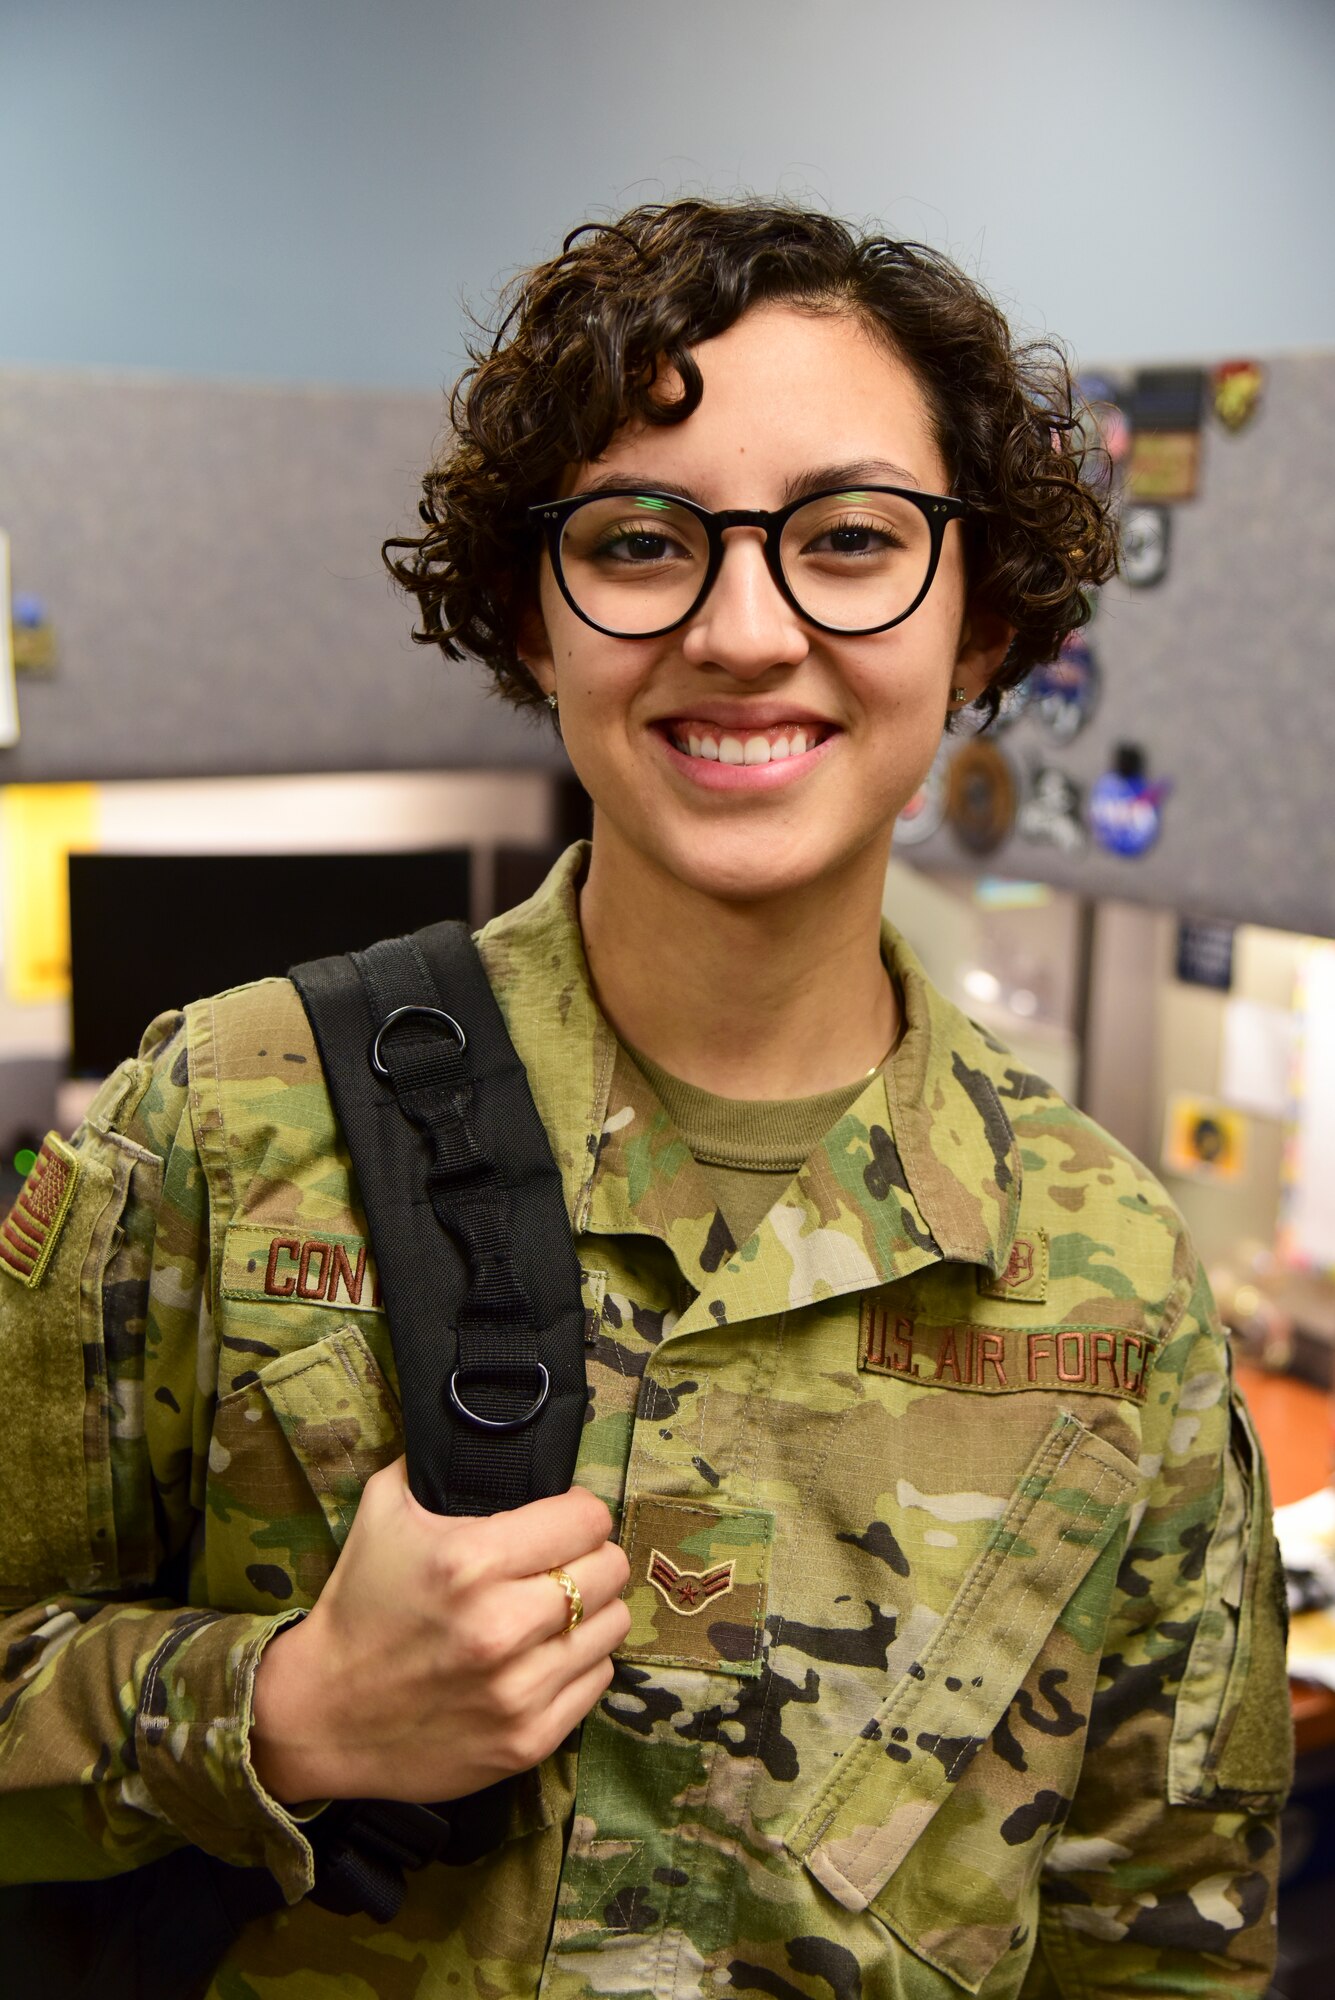 Airman 1st class Sahira Contreras, 47th Health Care Operations Squadron referral management technician, stands in her office where she helps patients at Laughlin Air Force Base, Texas, Jan. 9, 2020. She was awarded Senior Airman Below the Zone in December 2019, giving her privilege of donning her next stripe and the next level of responsibility six months earlier than normal. (U.S. Air Force photo by Senior Airman Anne McCready)